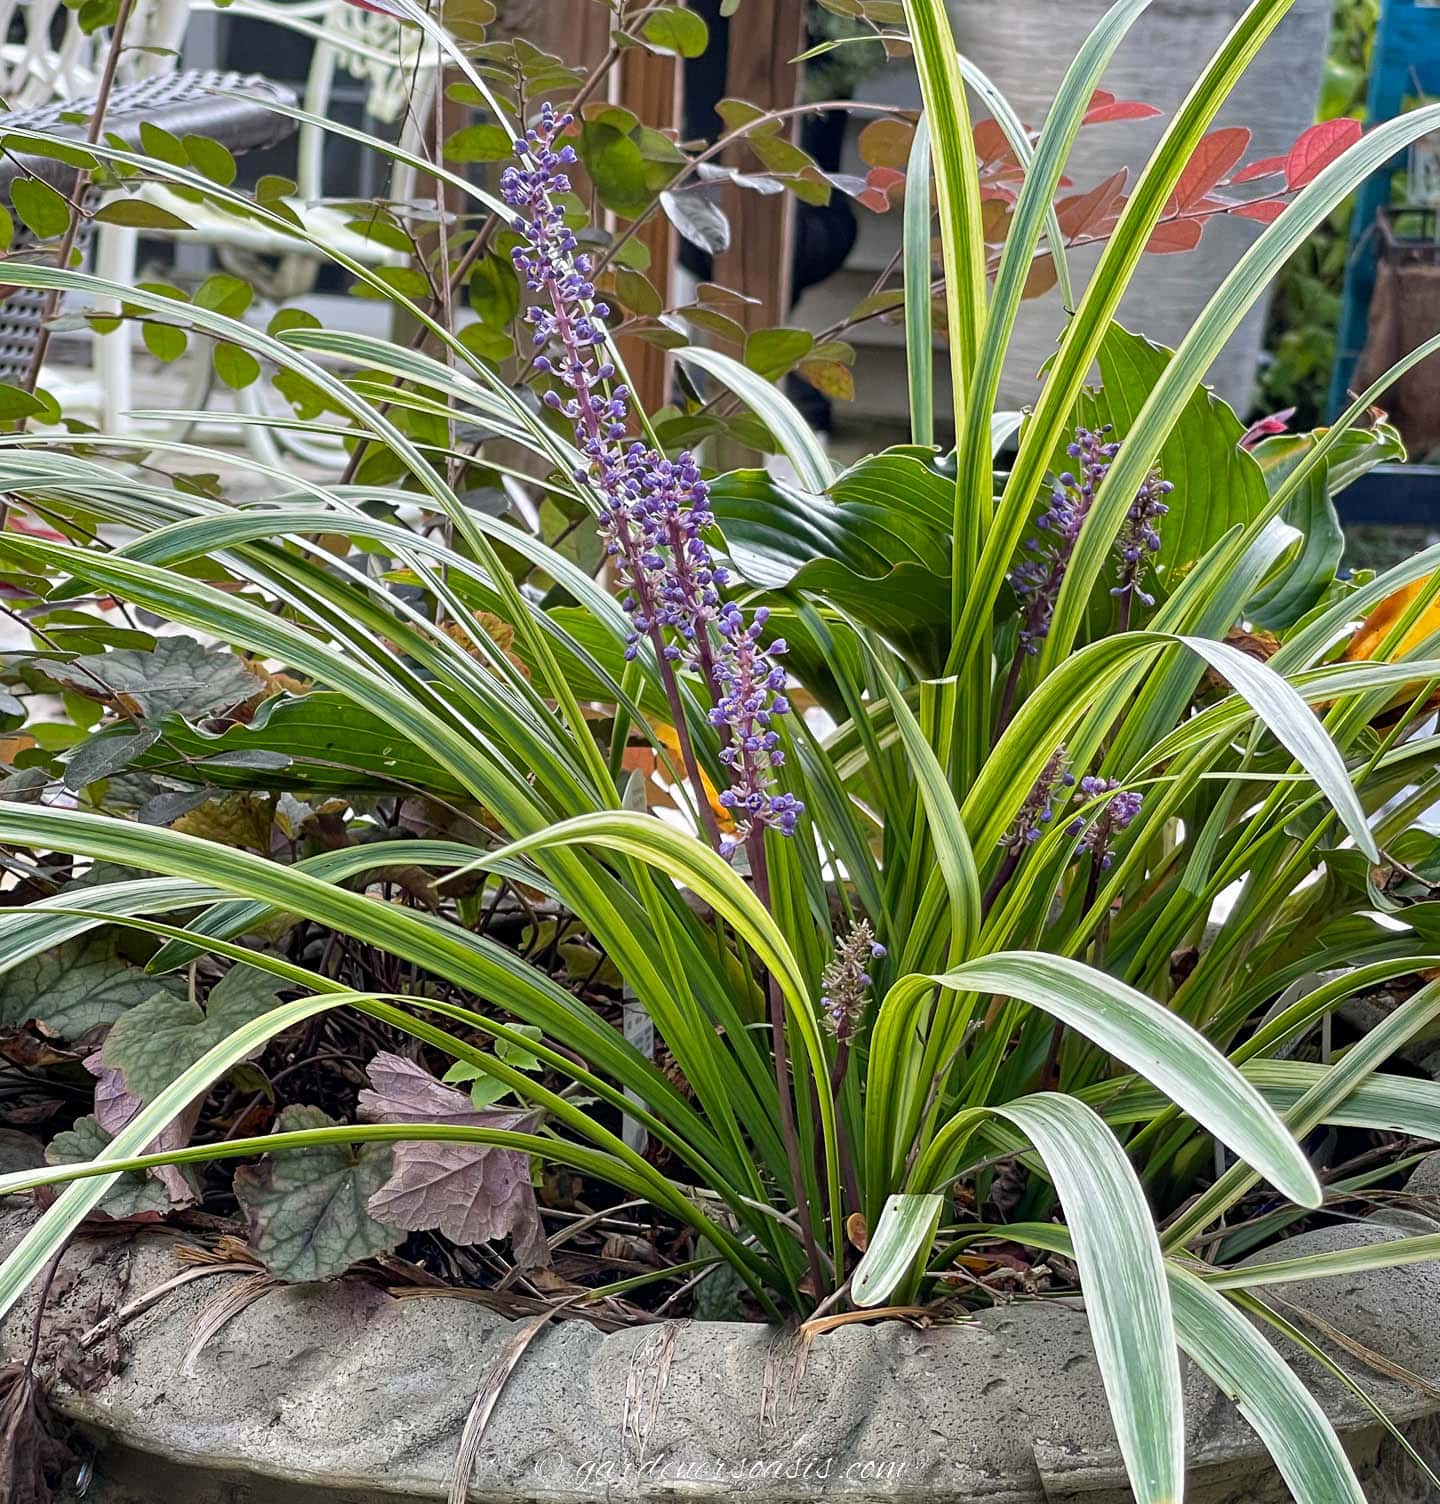 Liriope muscari growing in a container